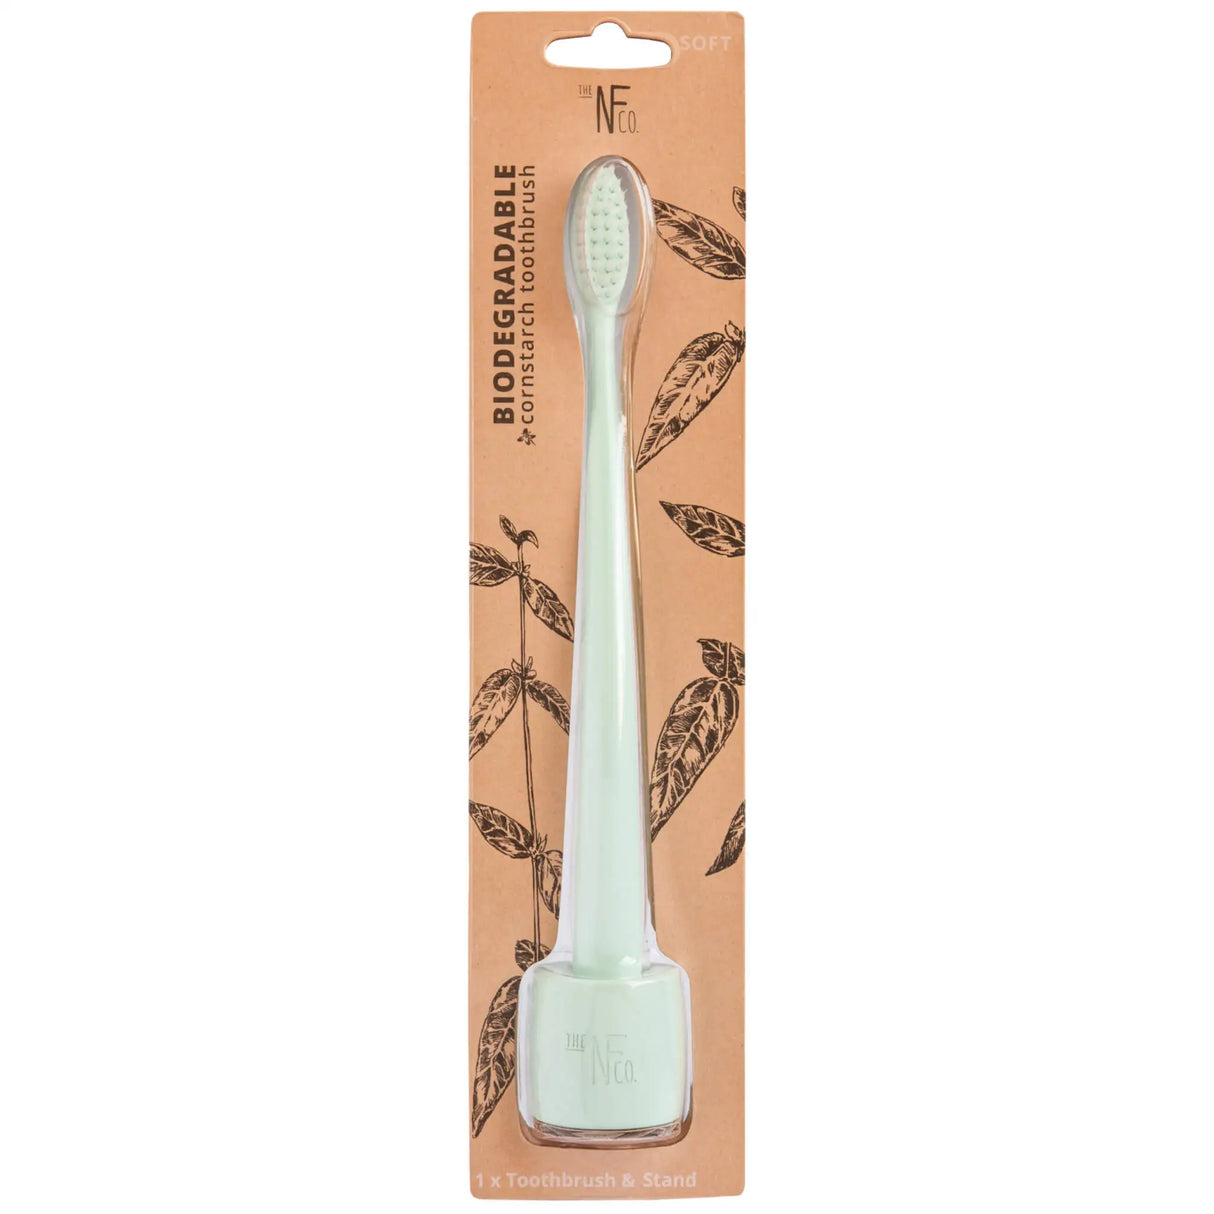 Nfco Bio Mnsn Mst Stnd Anti-Bacterial Toothbrush (Pack of 8) - Cozy Farm 